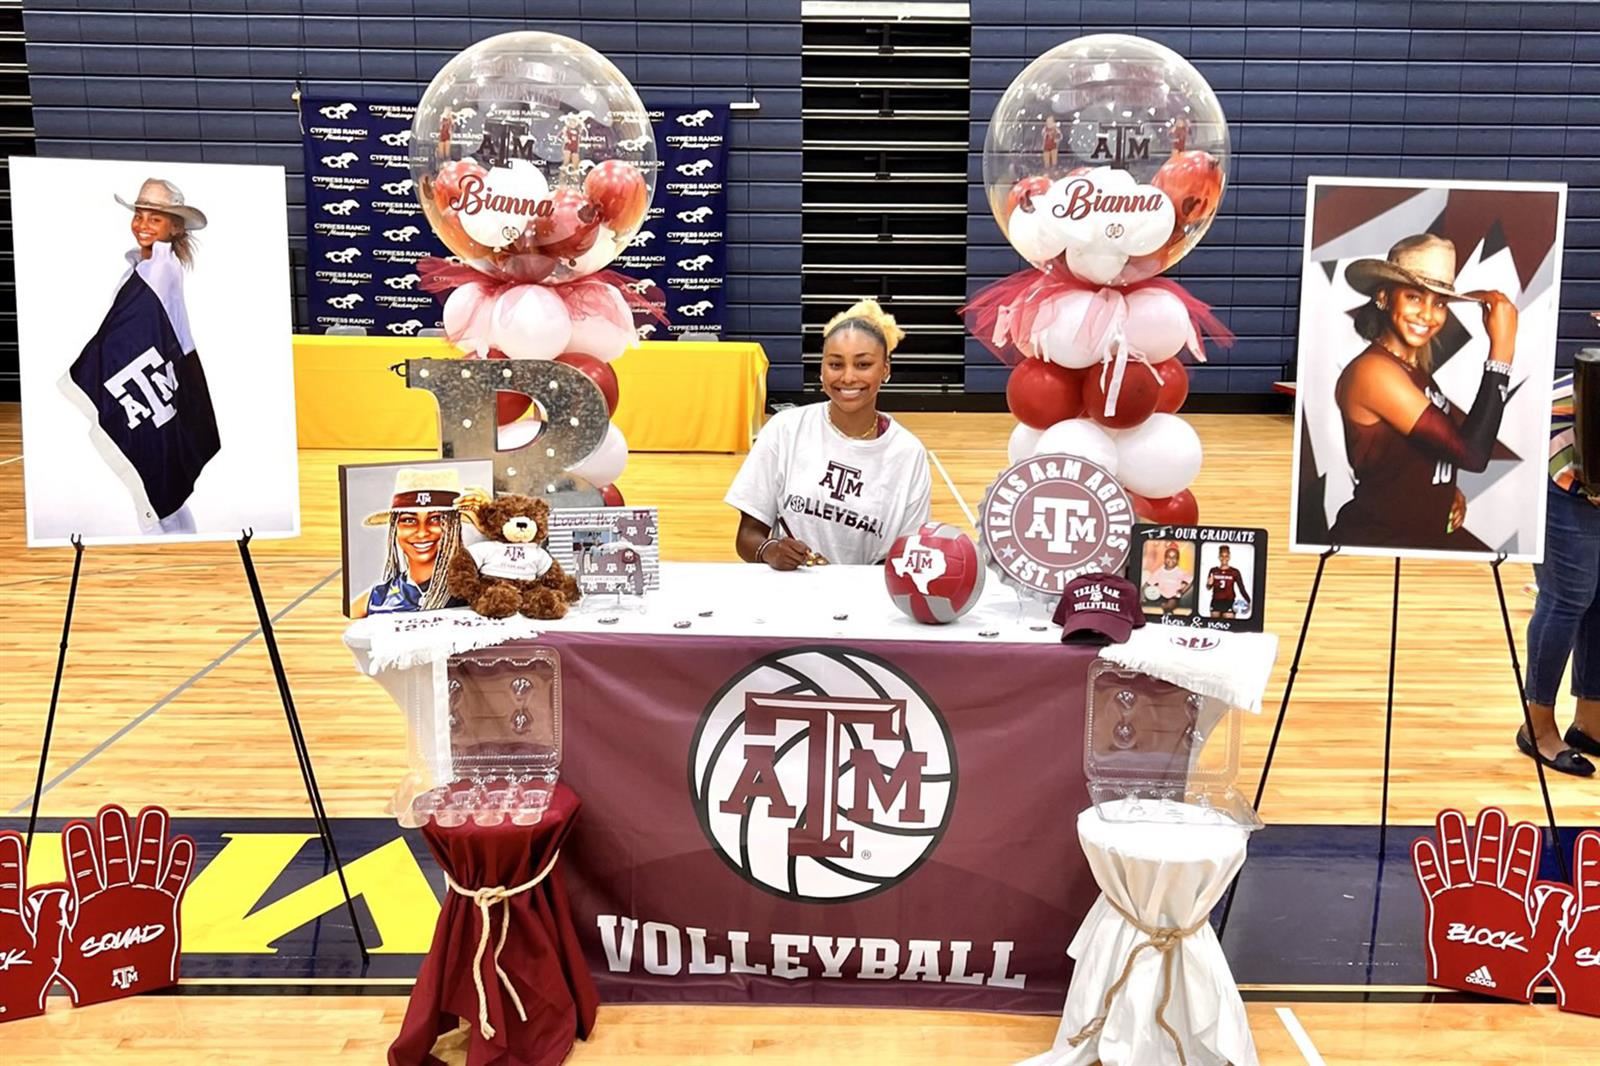 Cypress Ranch High School senior Bianna Muoneke signed a letter of intent to play volleyball at Texas A&M University.